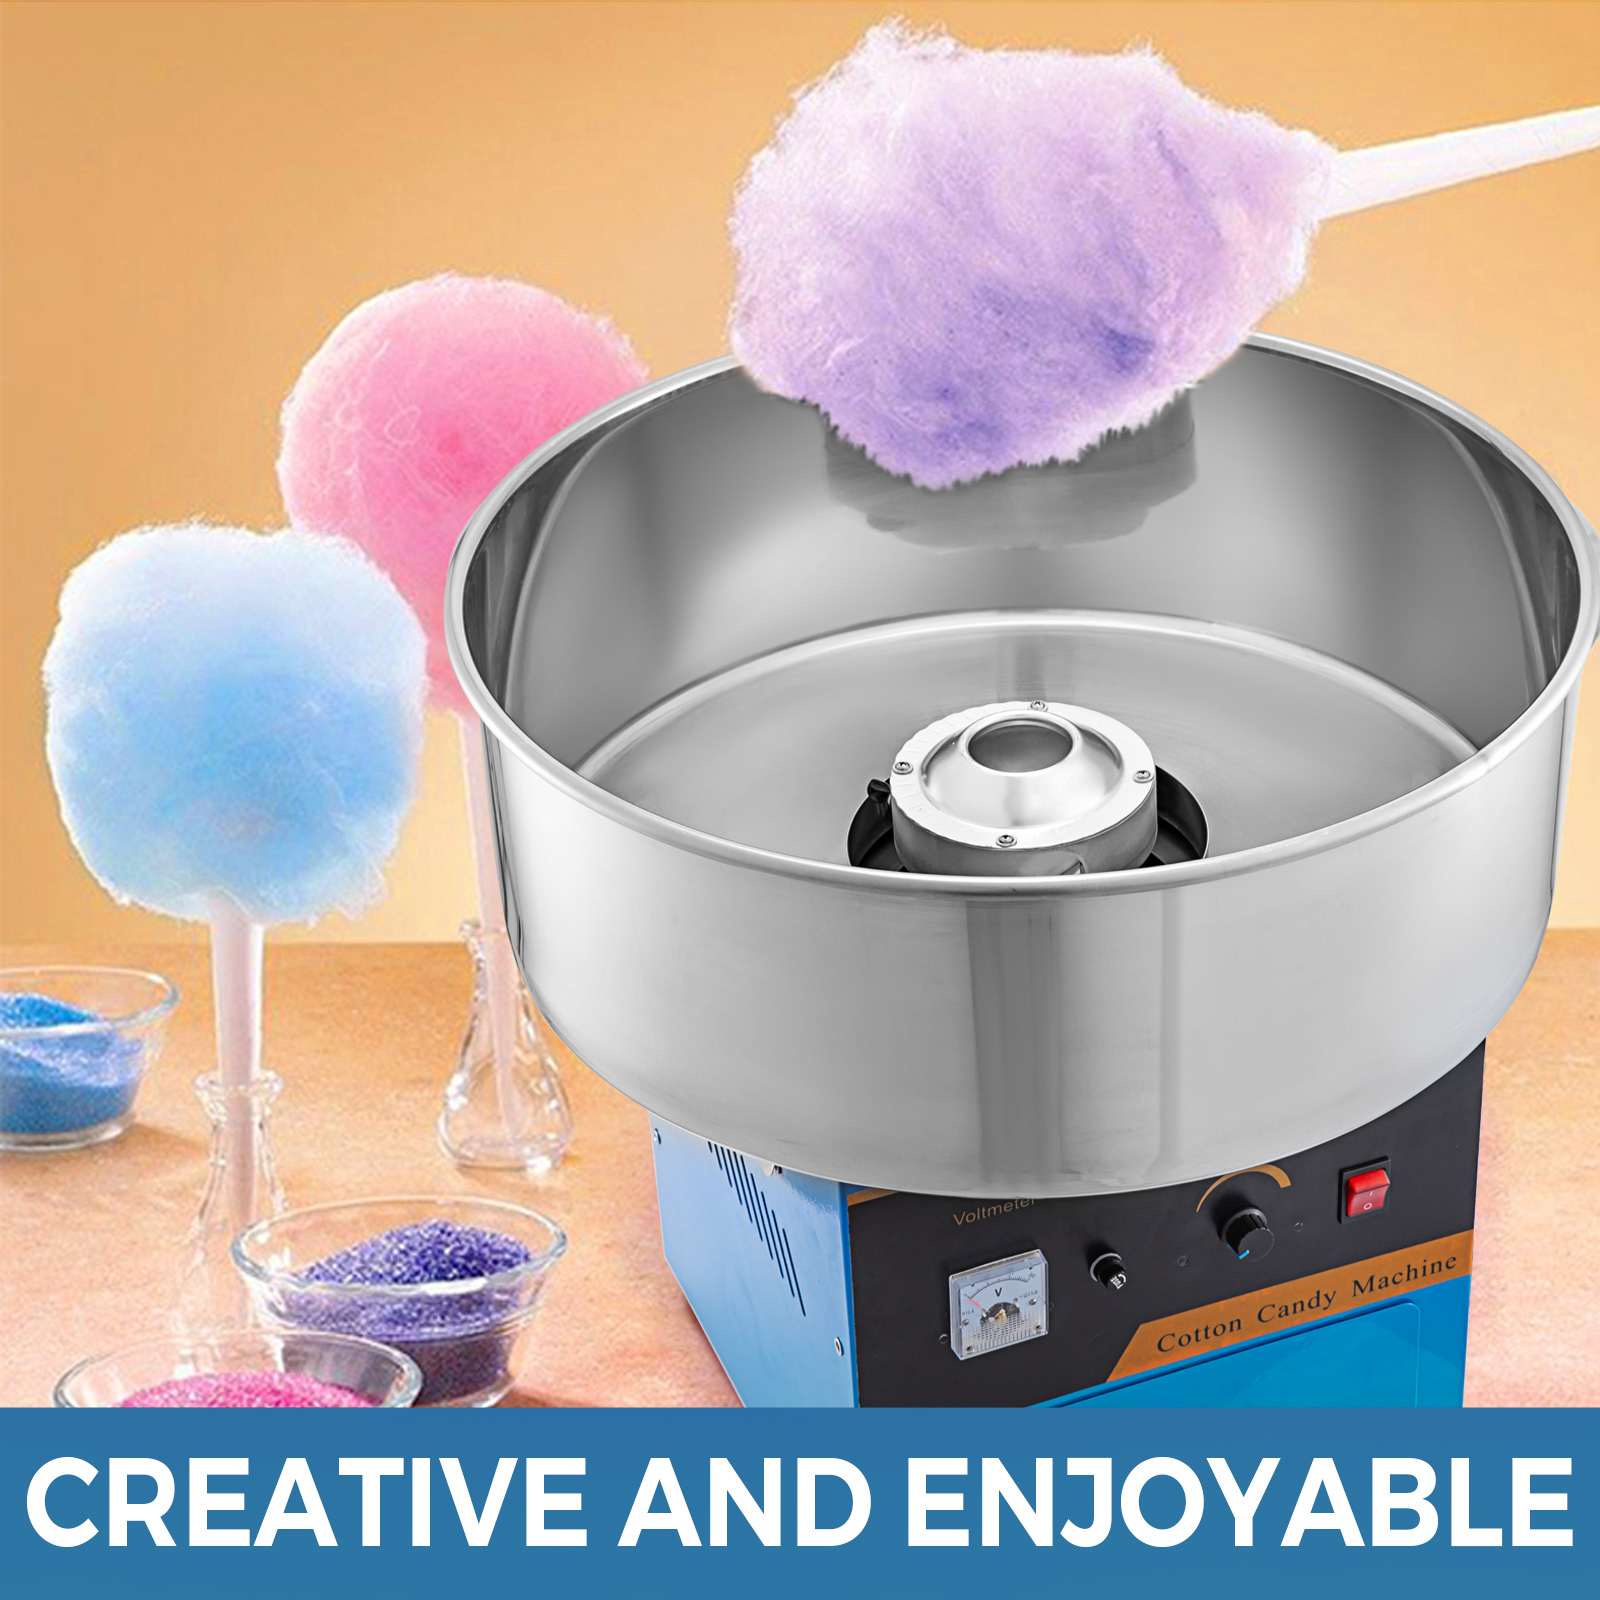 21"Commercial Cotton Candy Machine Sugar Floss Maker Party Electric （Blue） 